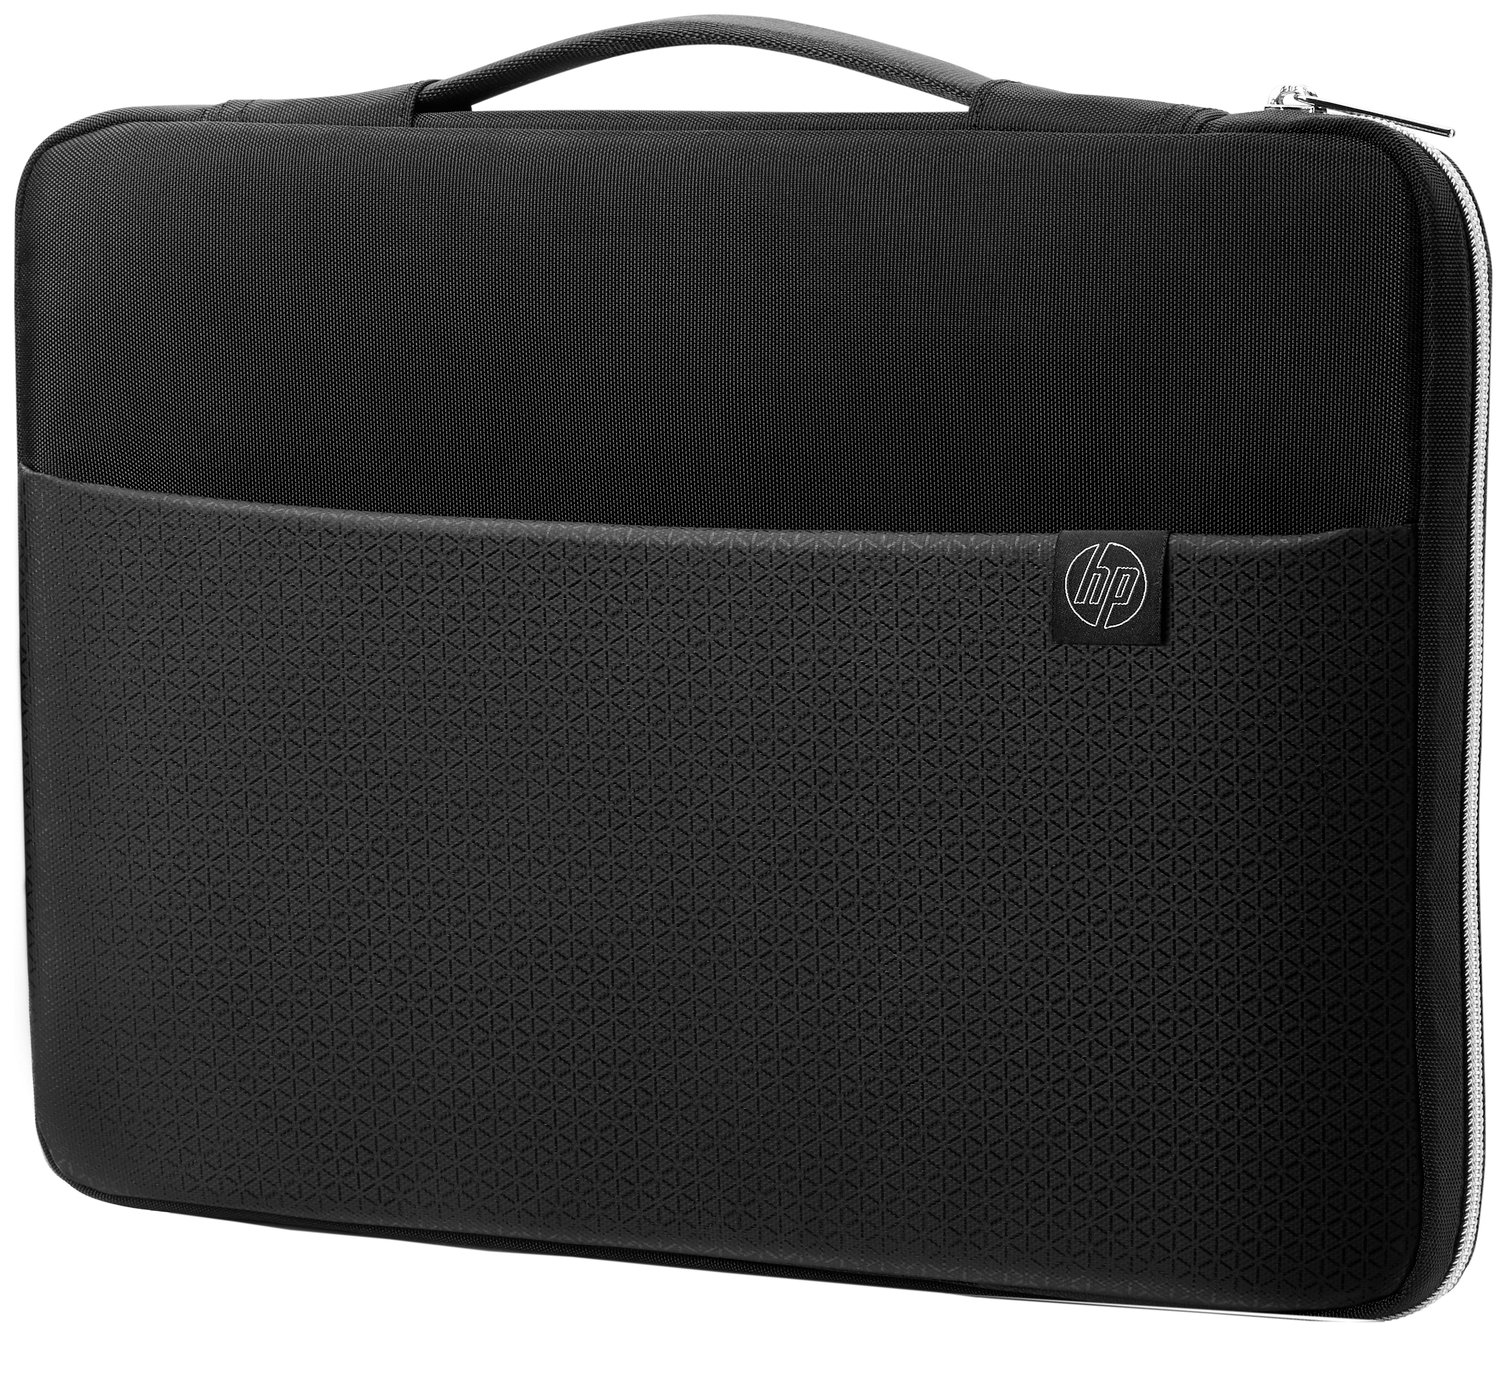 HP 14 Inch Laptop Sleeve Review